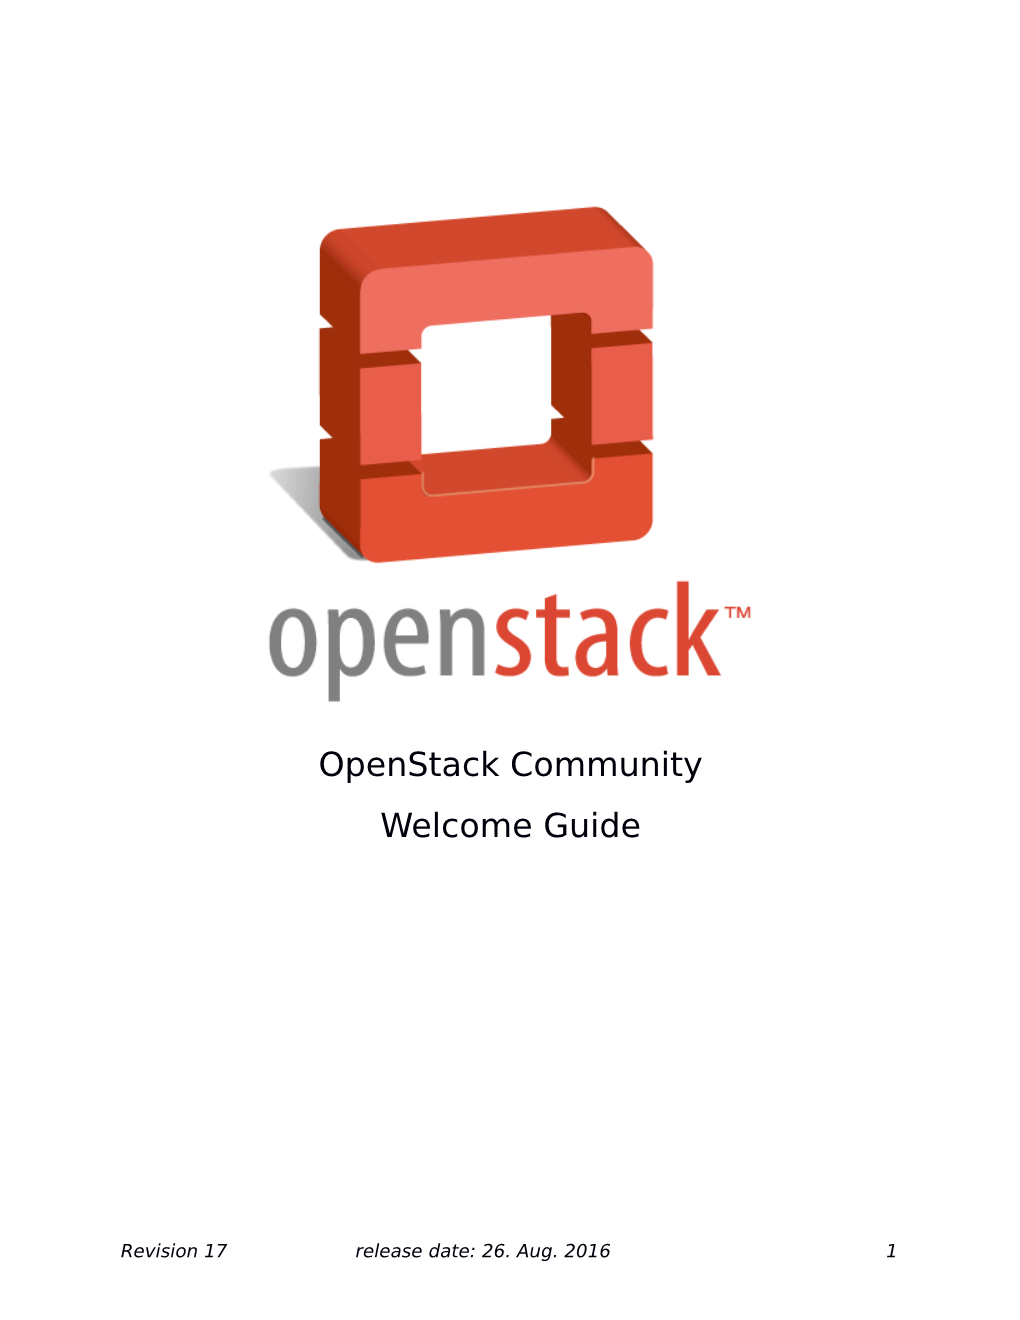 Openstack Community Welcome Guide